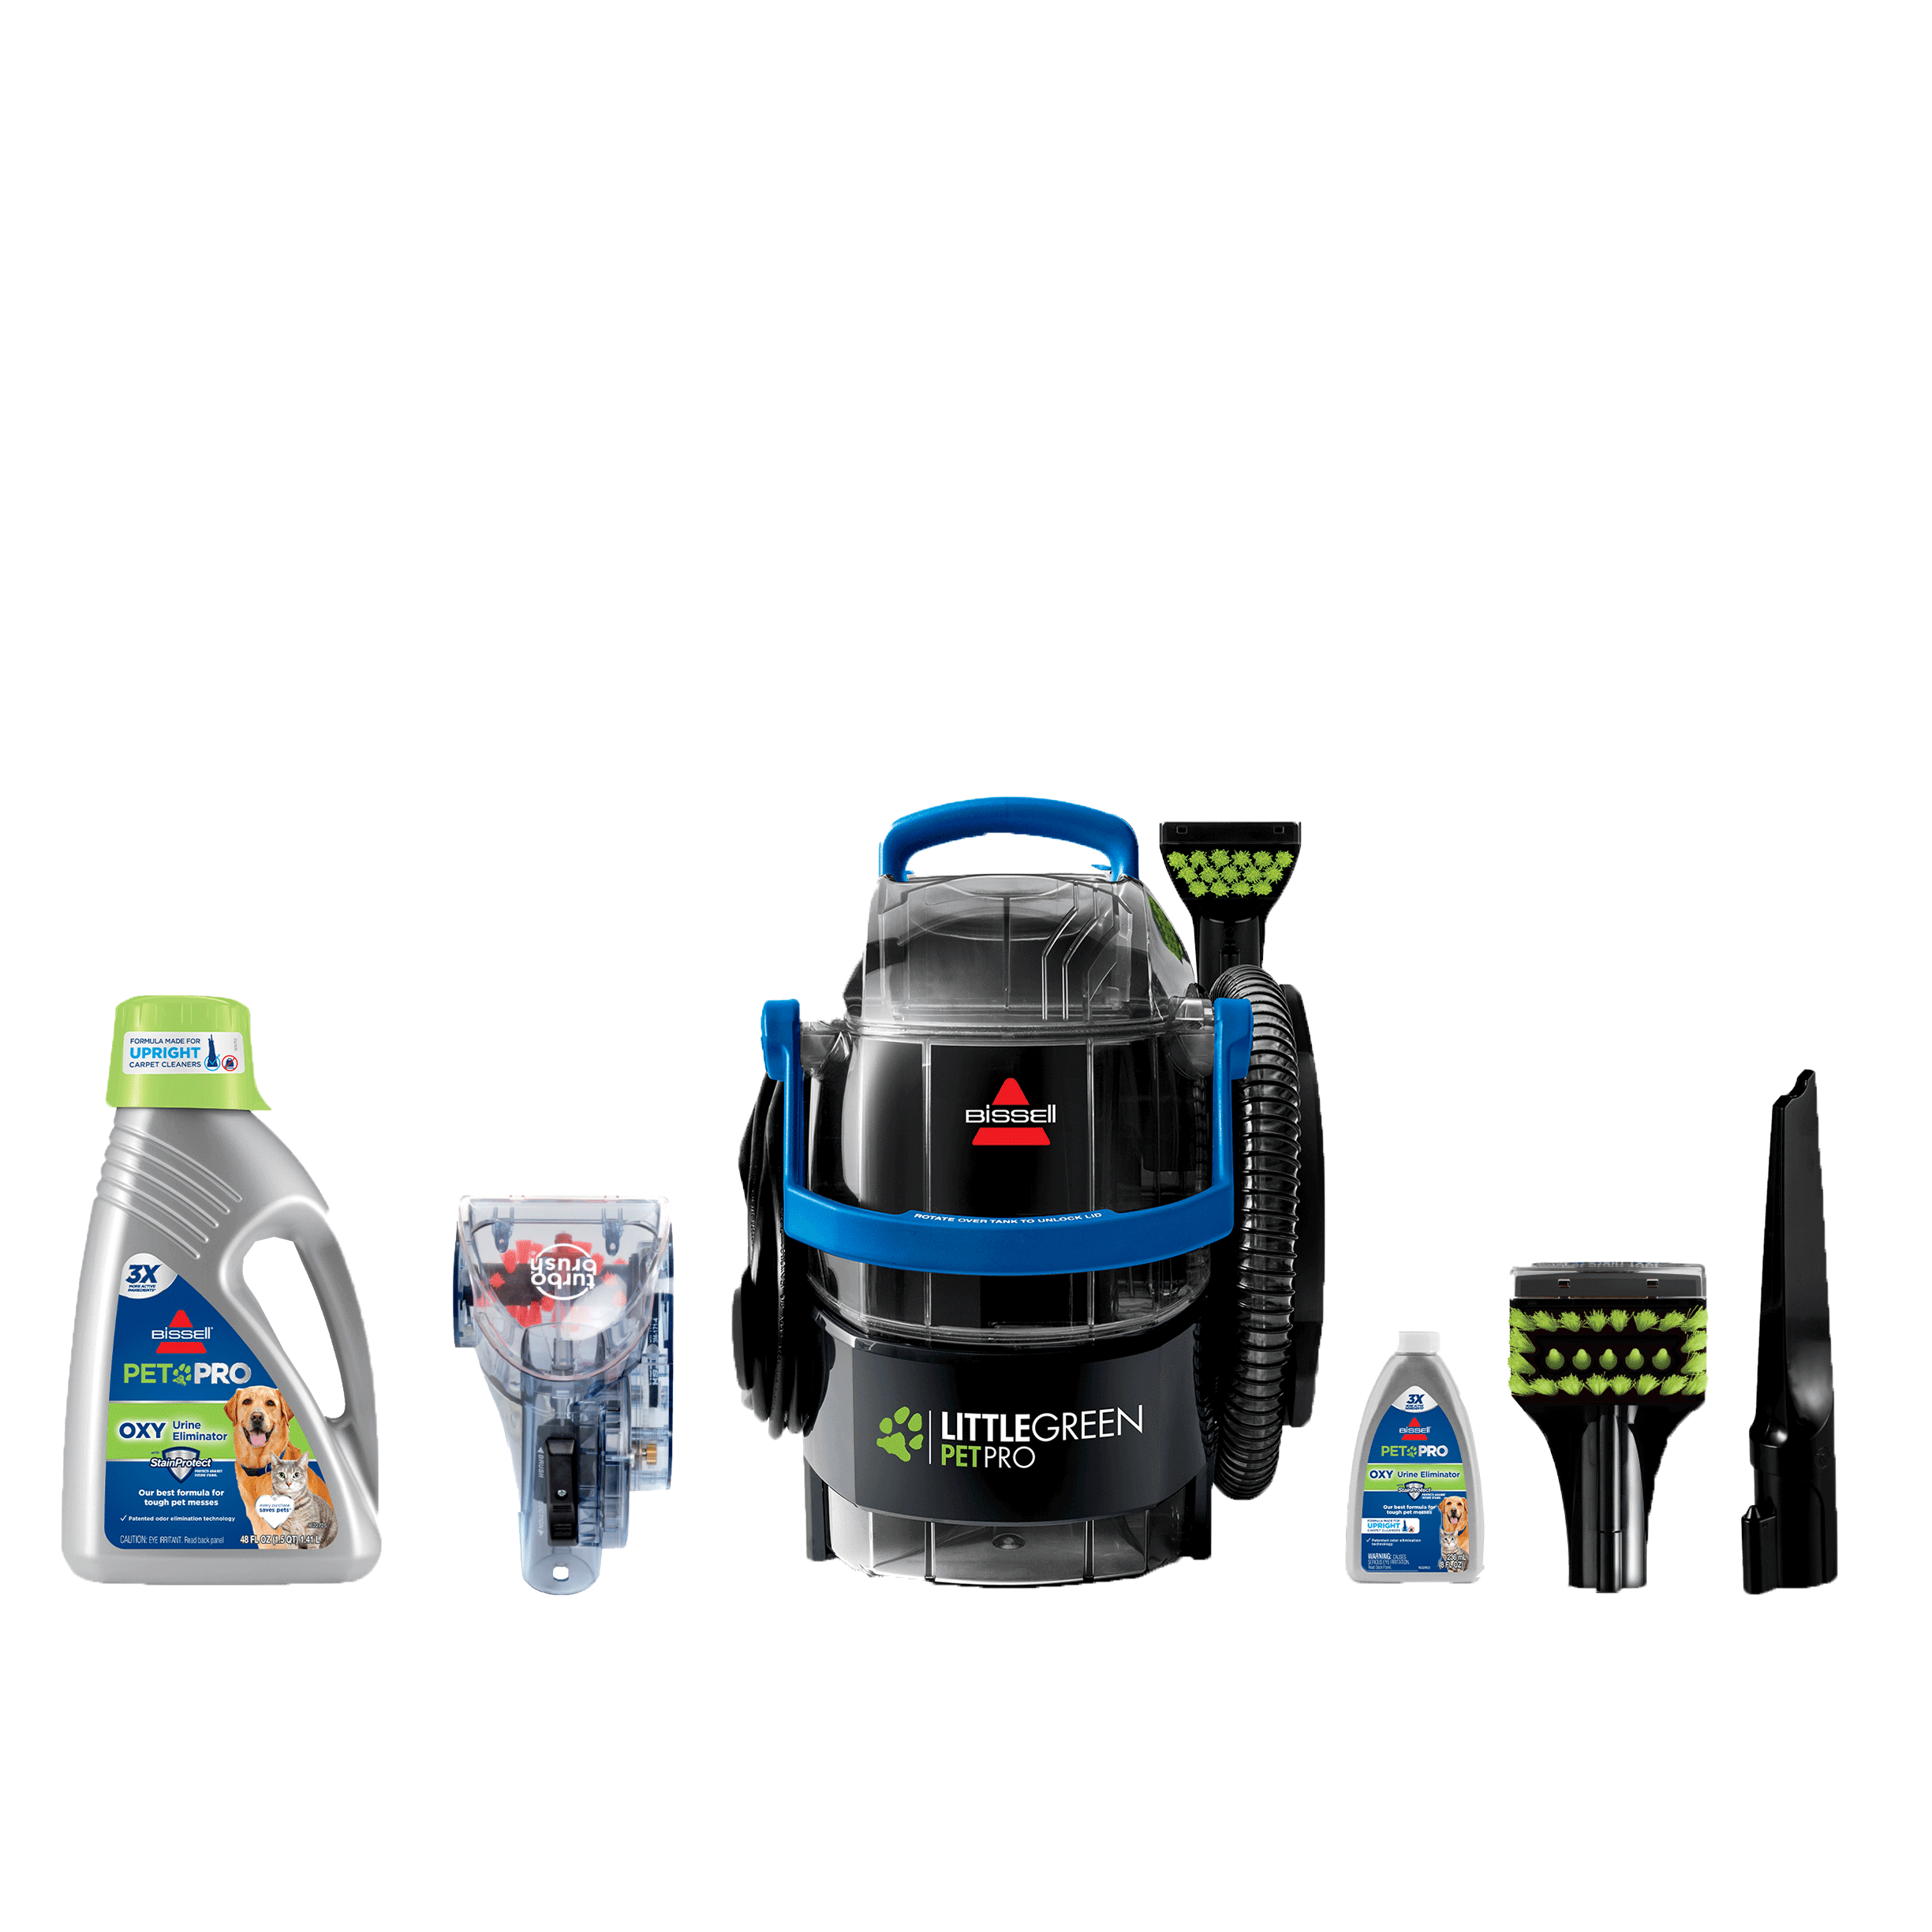 https://www.bissell.com/on/demandware.static/-/Sites-master-catalog-bissell/default/dw46ec79b0/hi-res/Product-Images/3429/_3429_Little_Green_Pet_Pro_Bundle_A+_Content_Secondary_01_Accessories_0623_TB.png